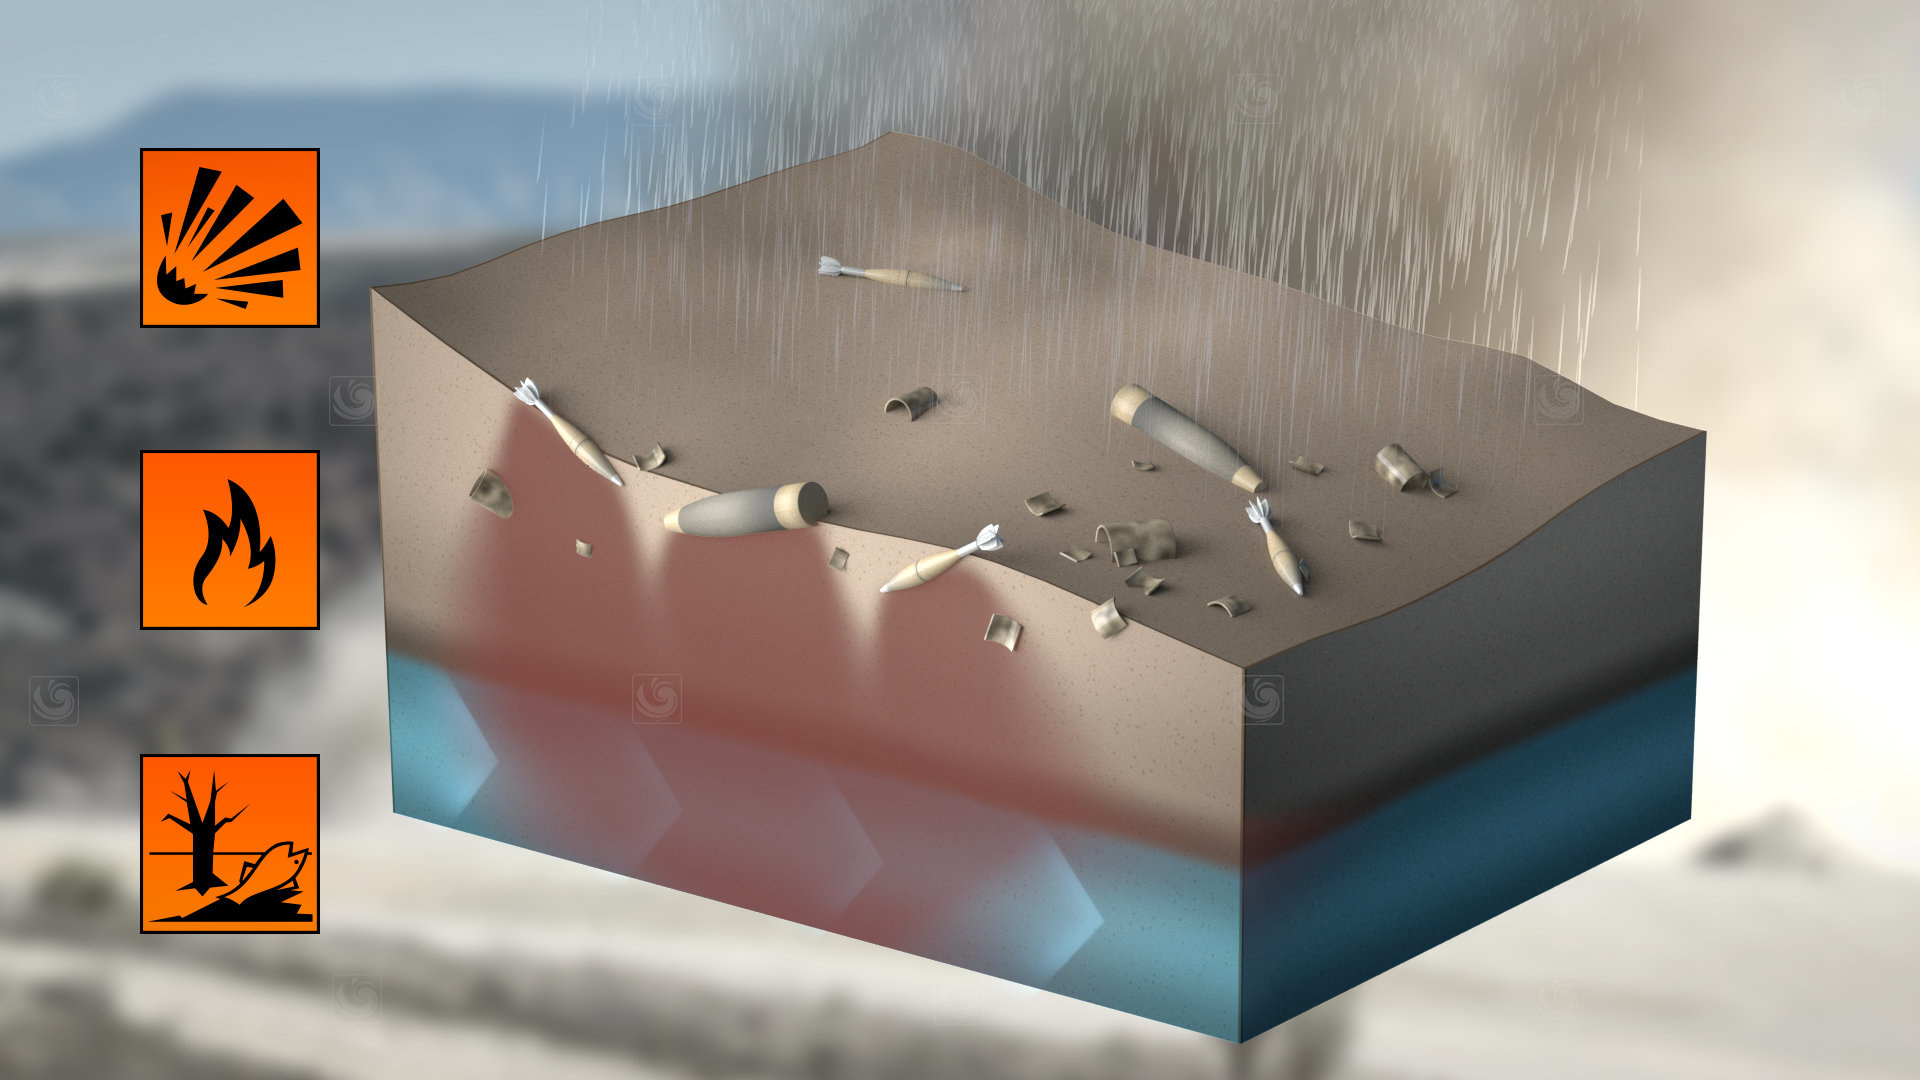 3D animation frame showing different hazards due to soil contamination